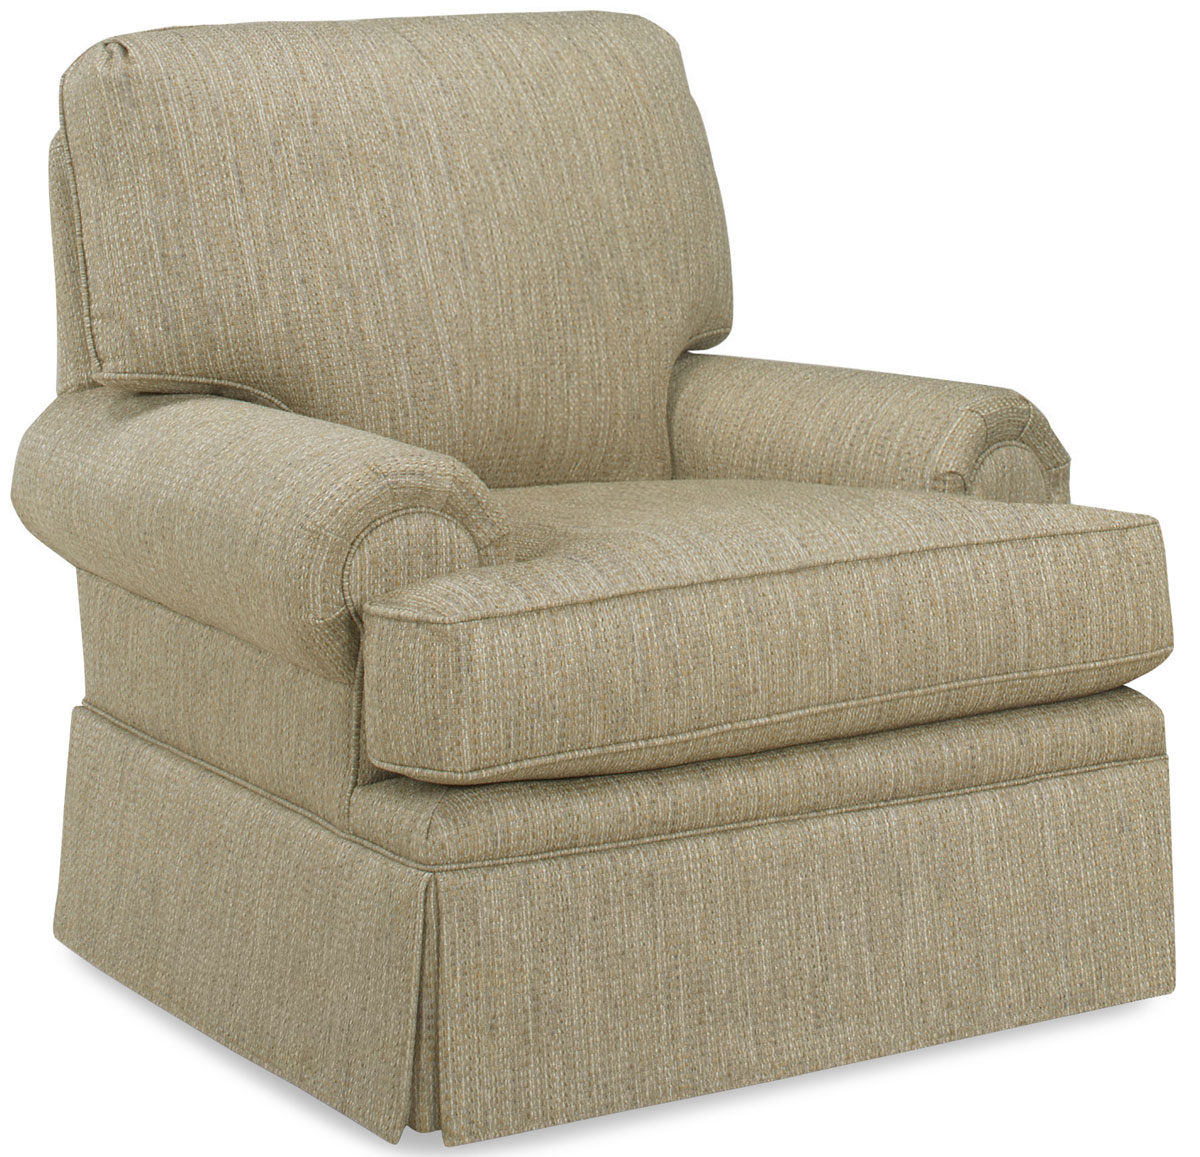 Temple Furniture 9505 Winston Chair